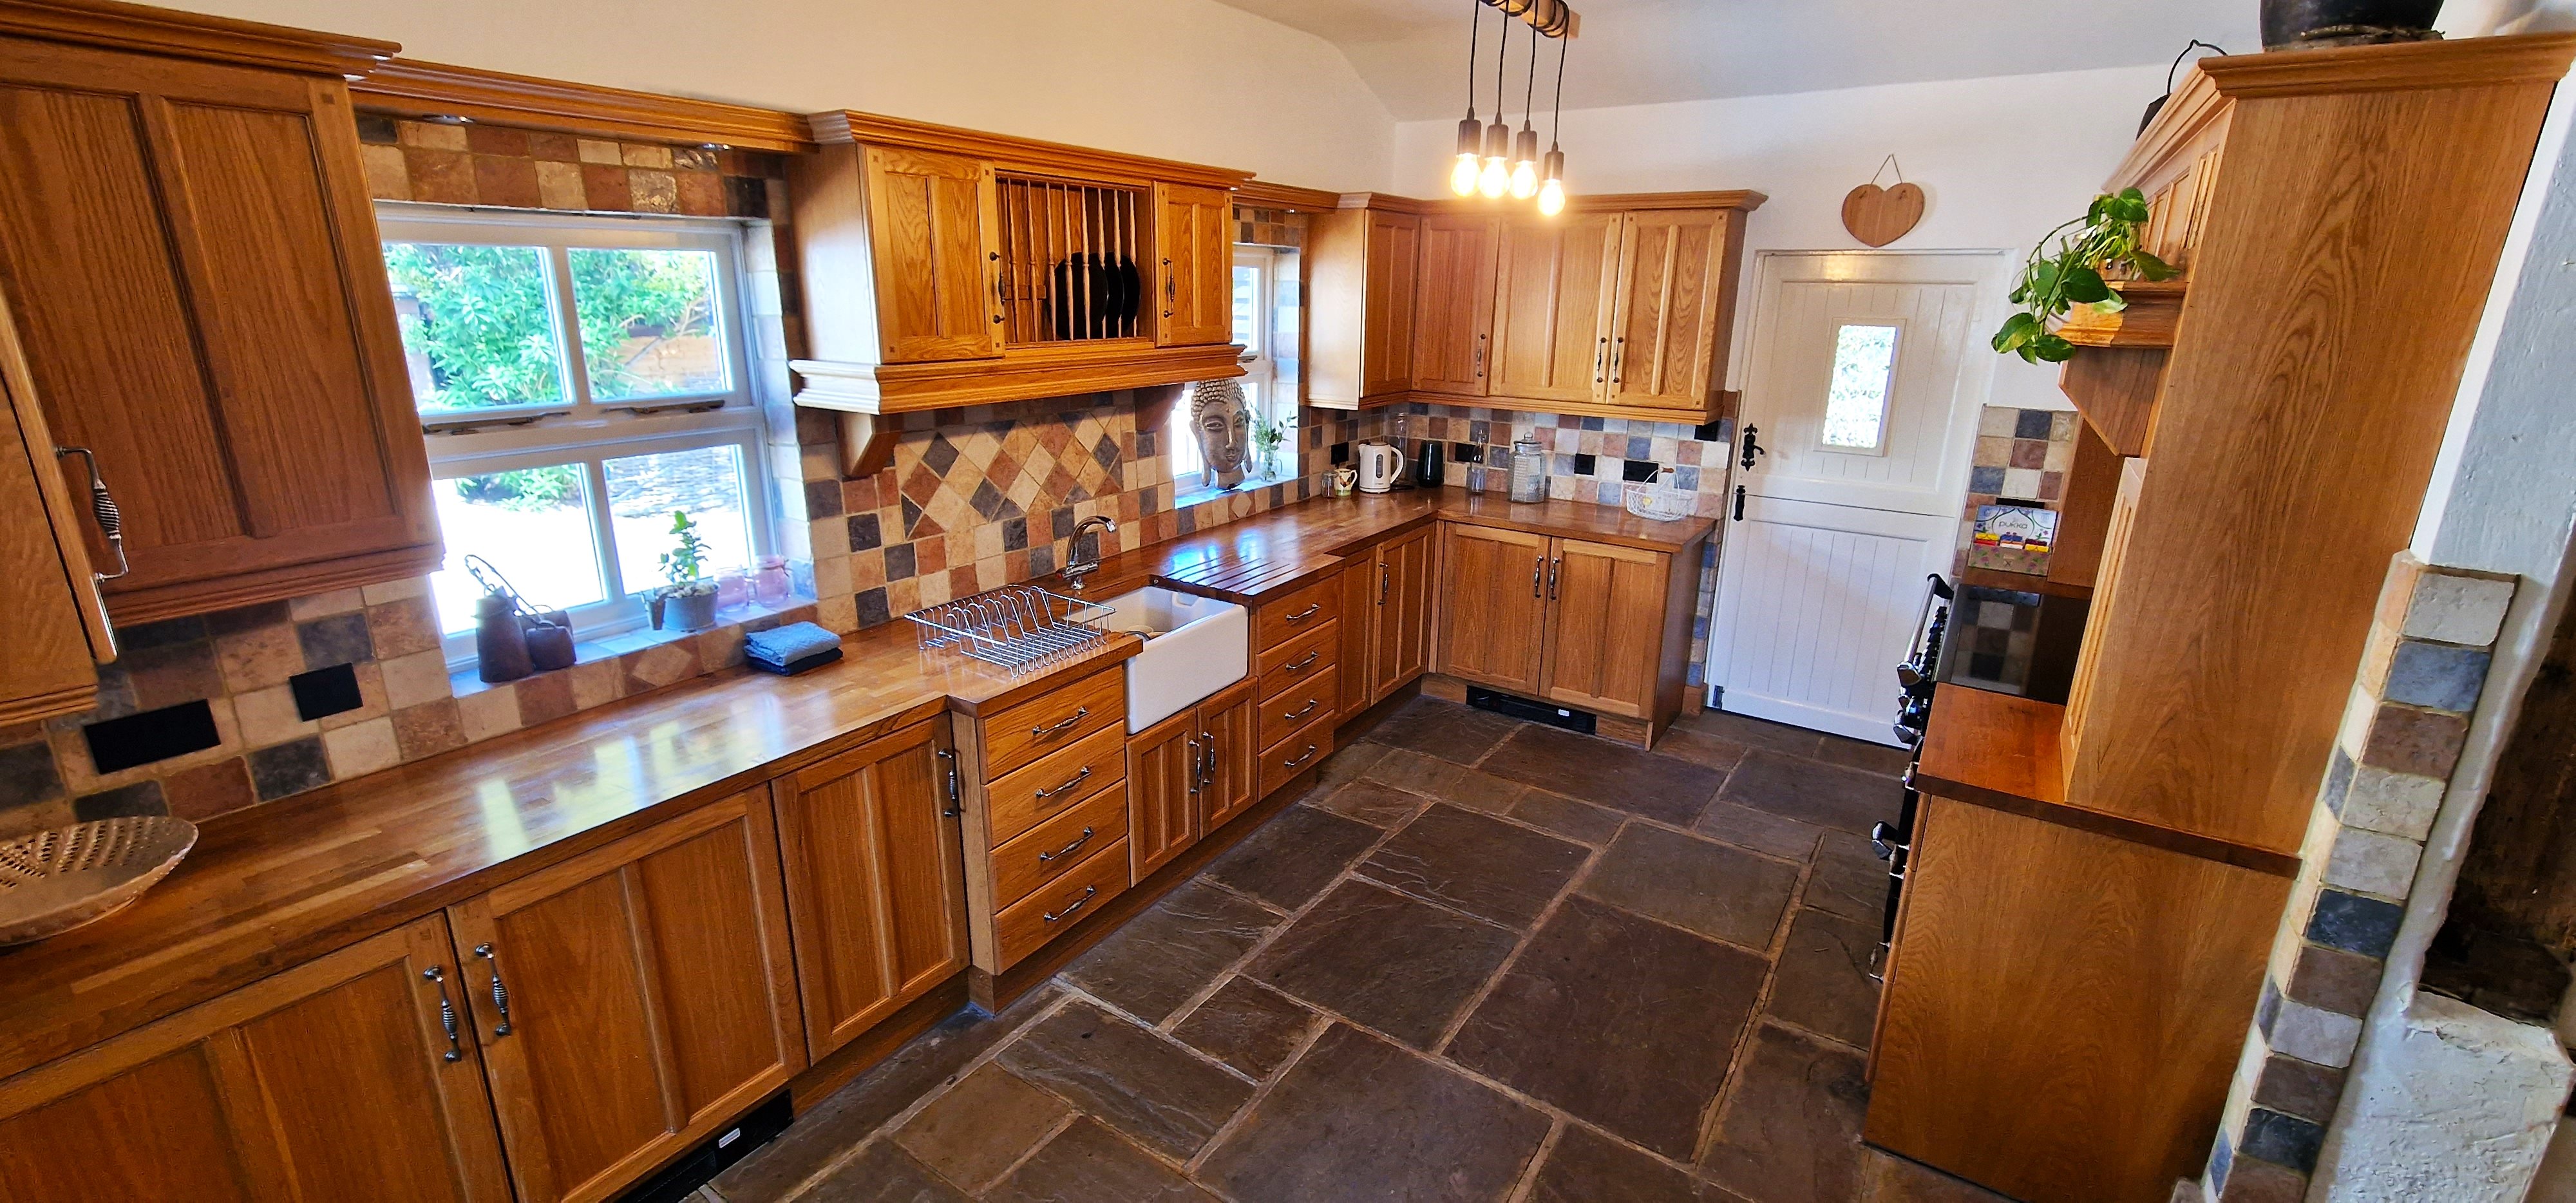 4 bed detached house to rent in Rettendon Old Hall, Rettendon Common  - Property Image 3